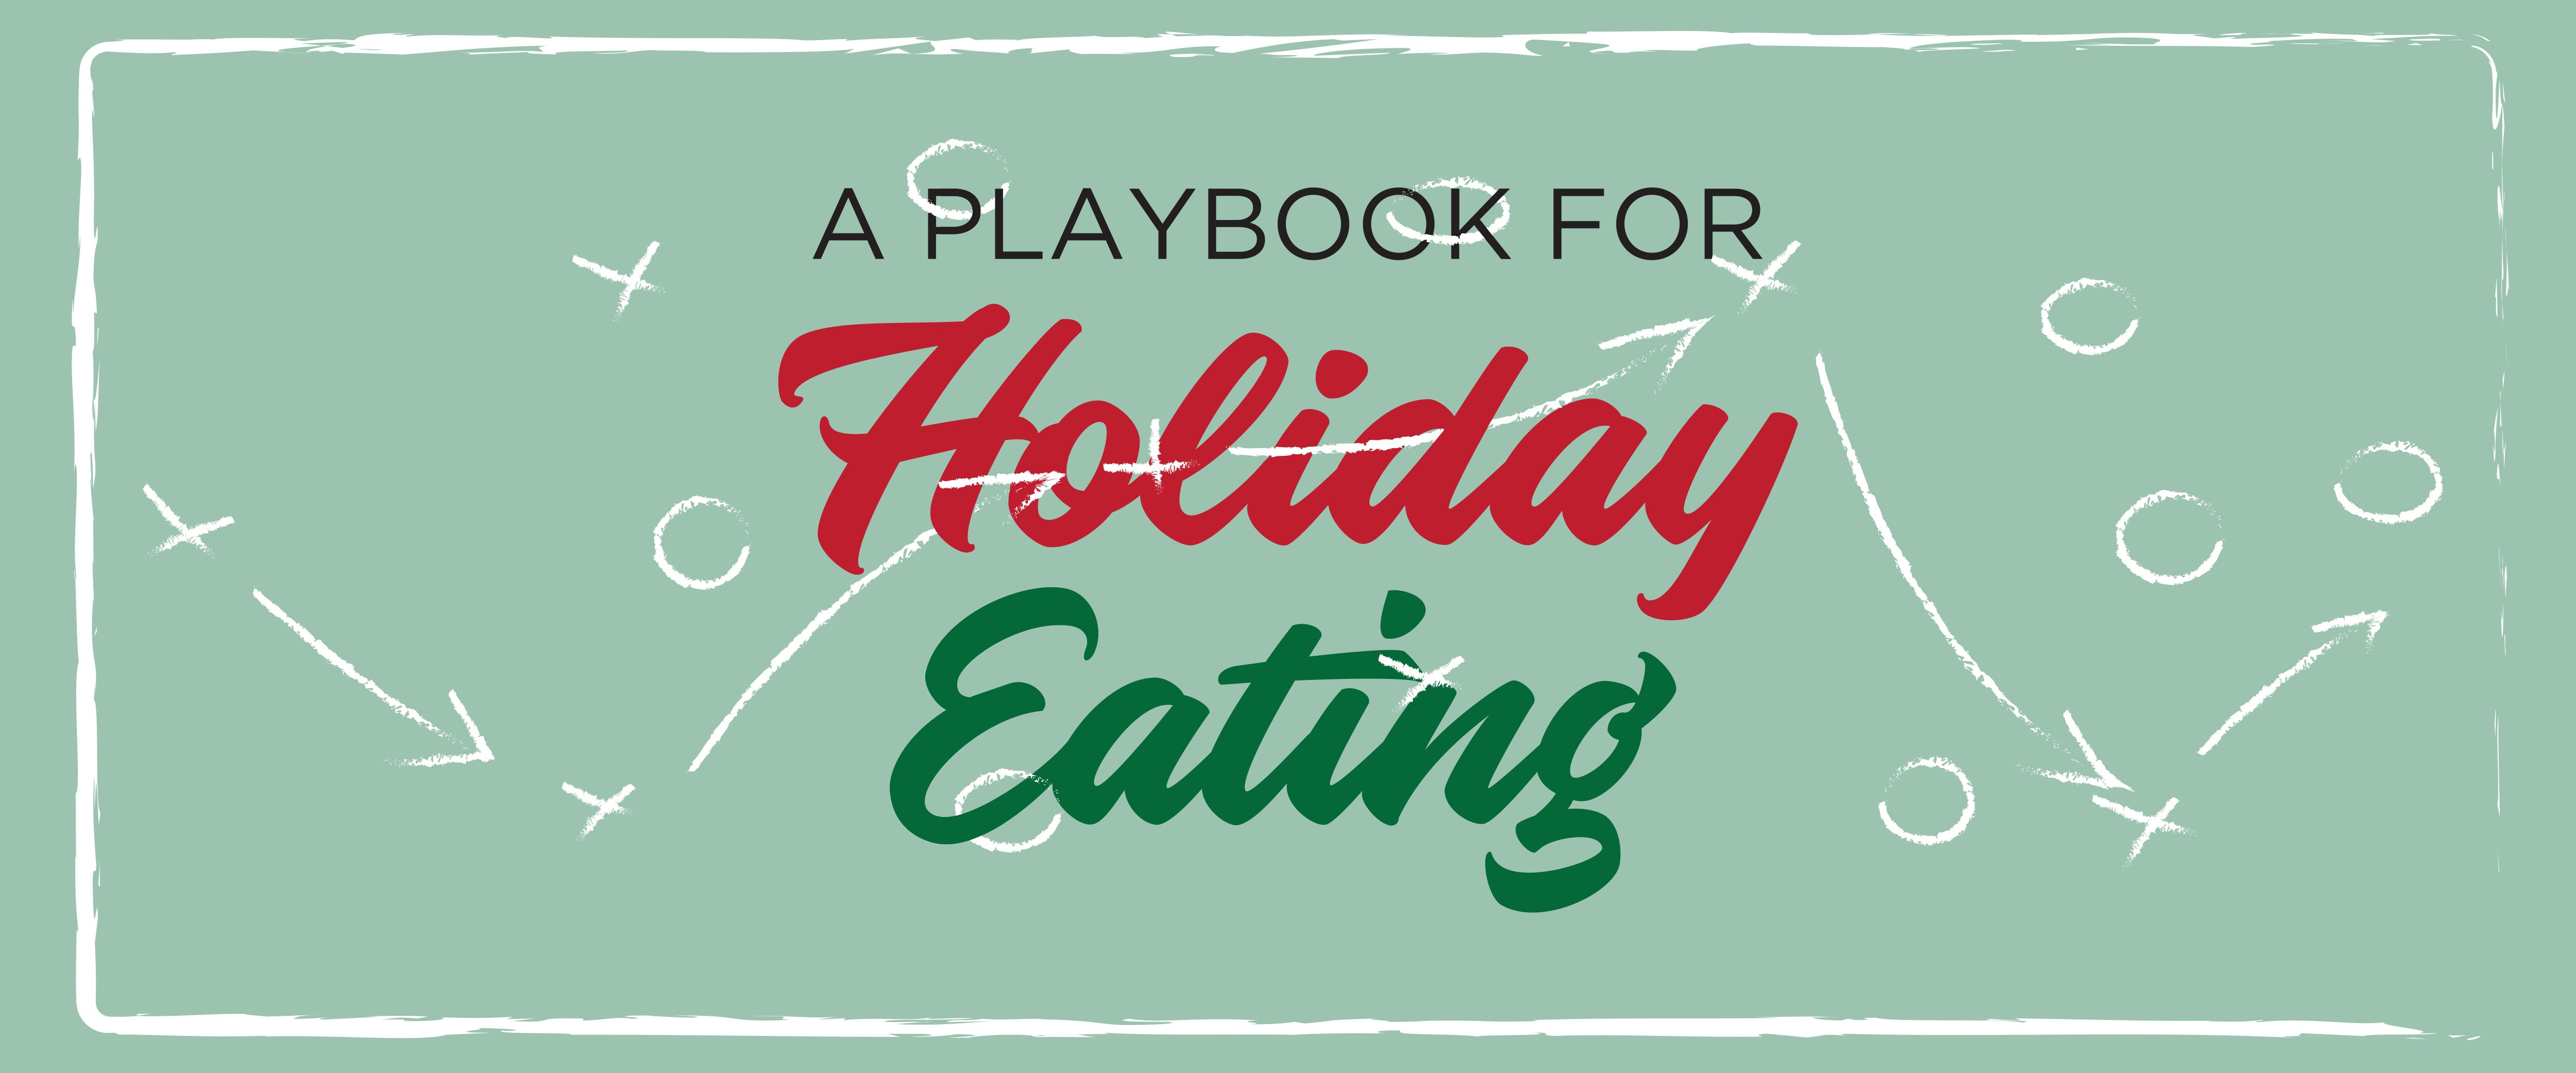 A Playbook for Holiday Eating